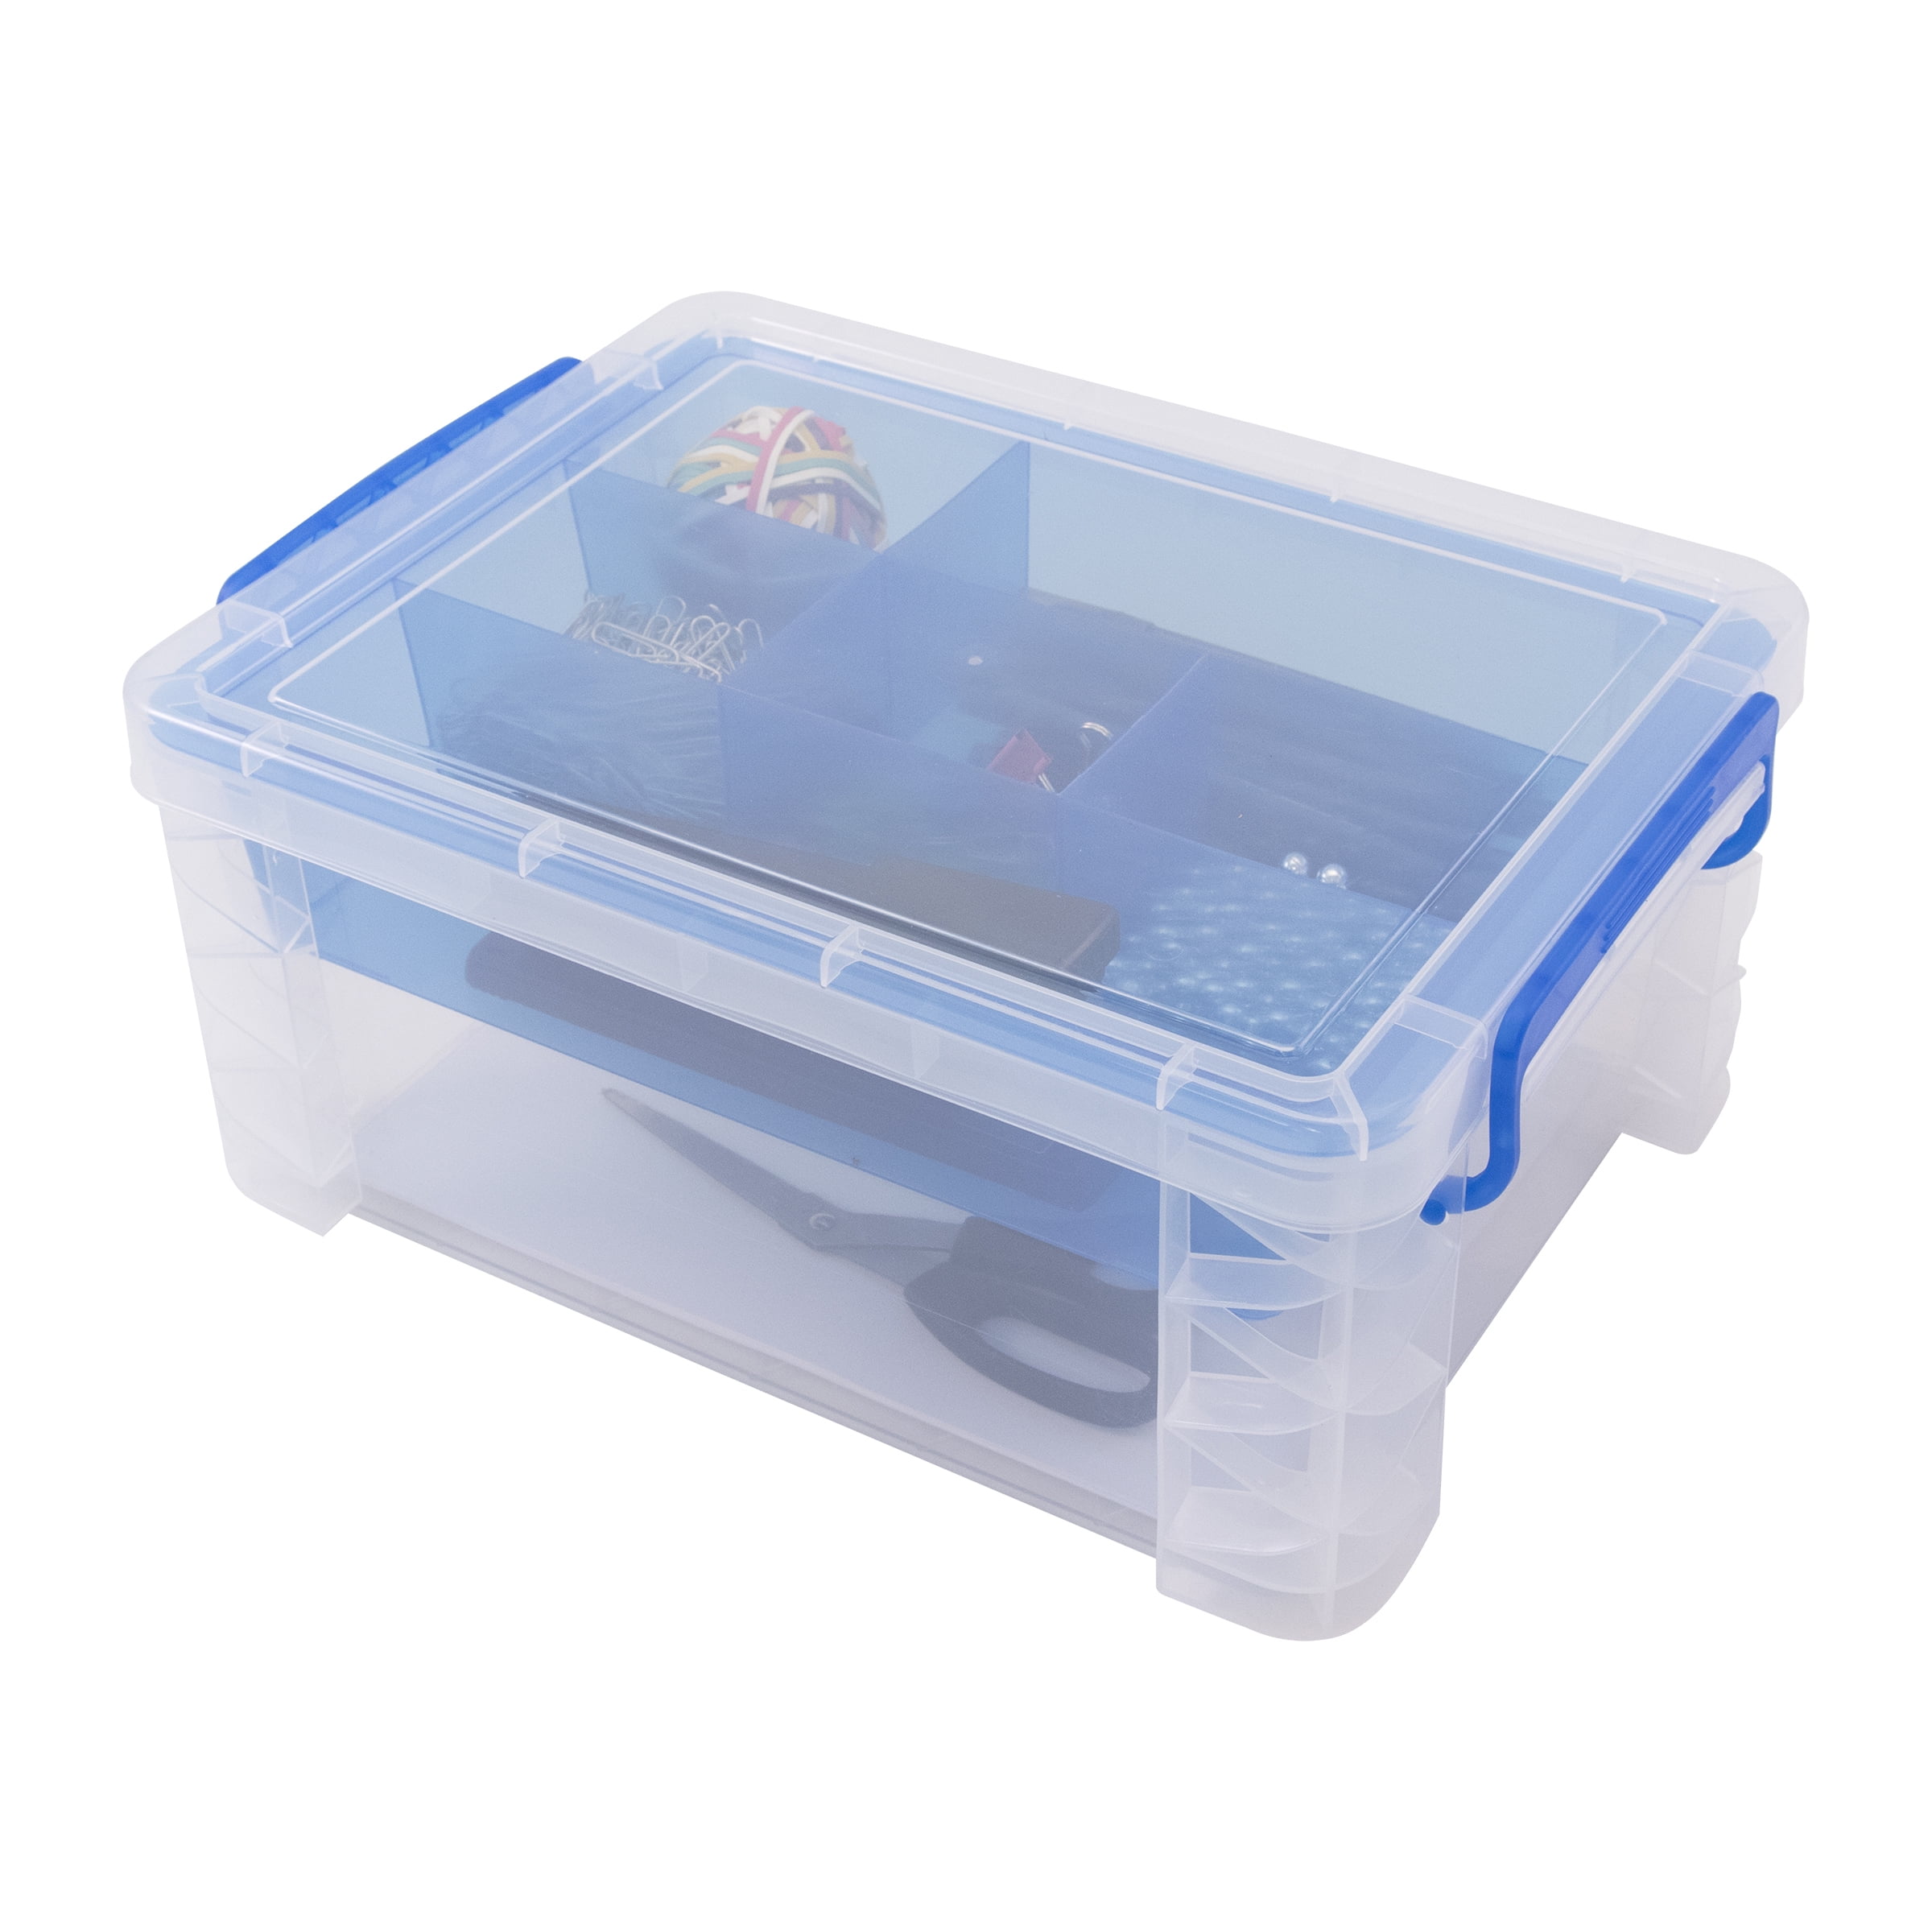 Only 0.89 usd for Rectangular Divided Storage Box 0.8 L Great deals!